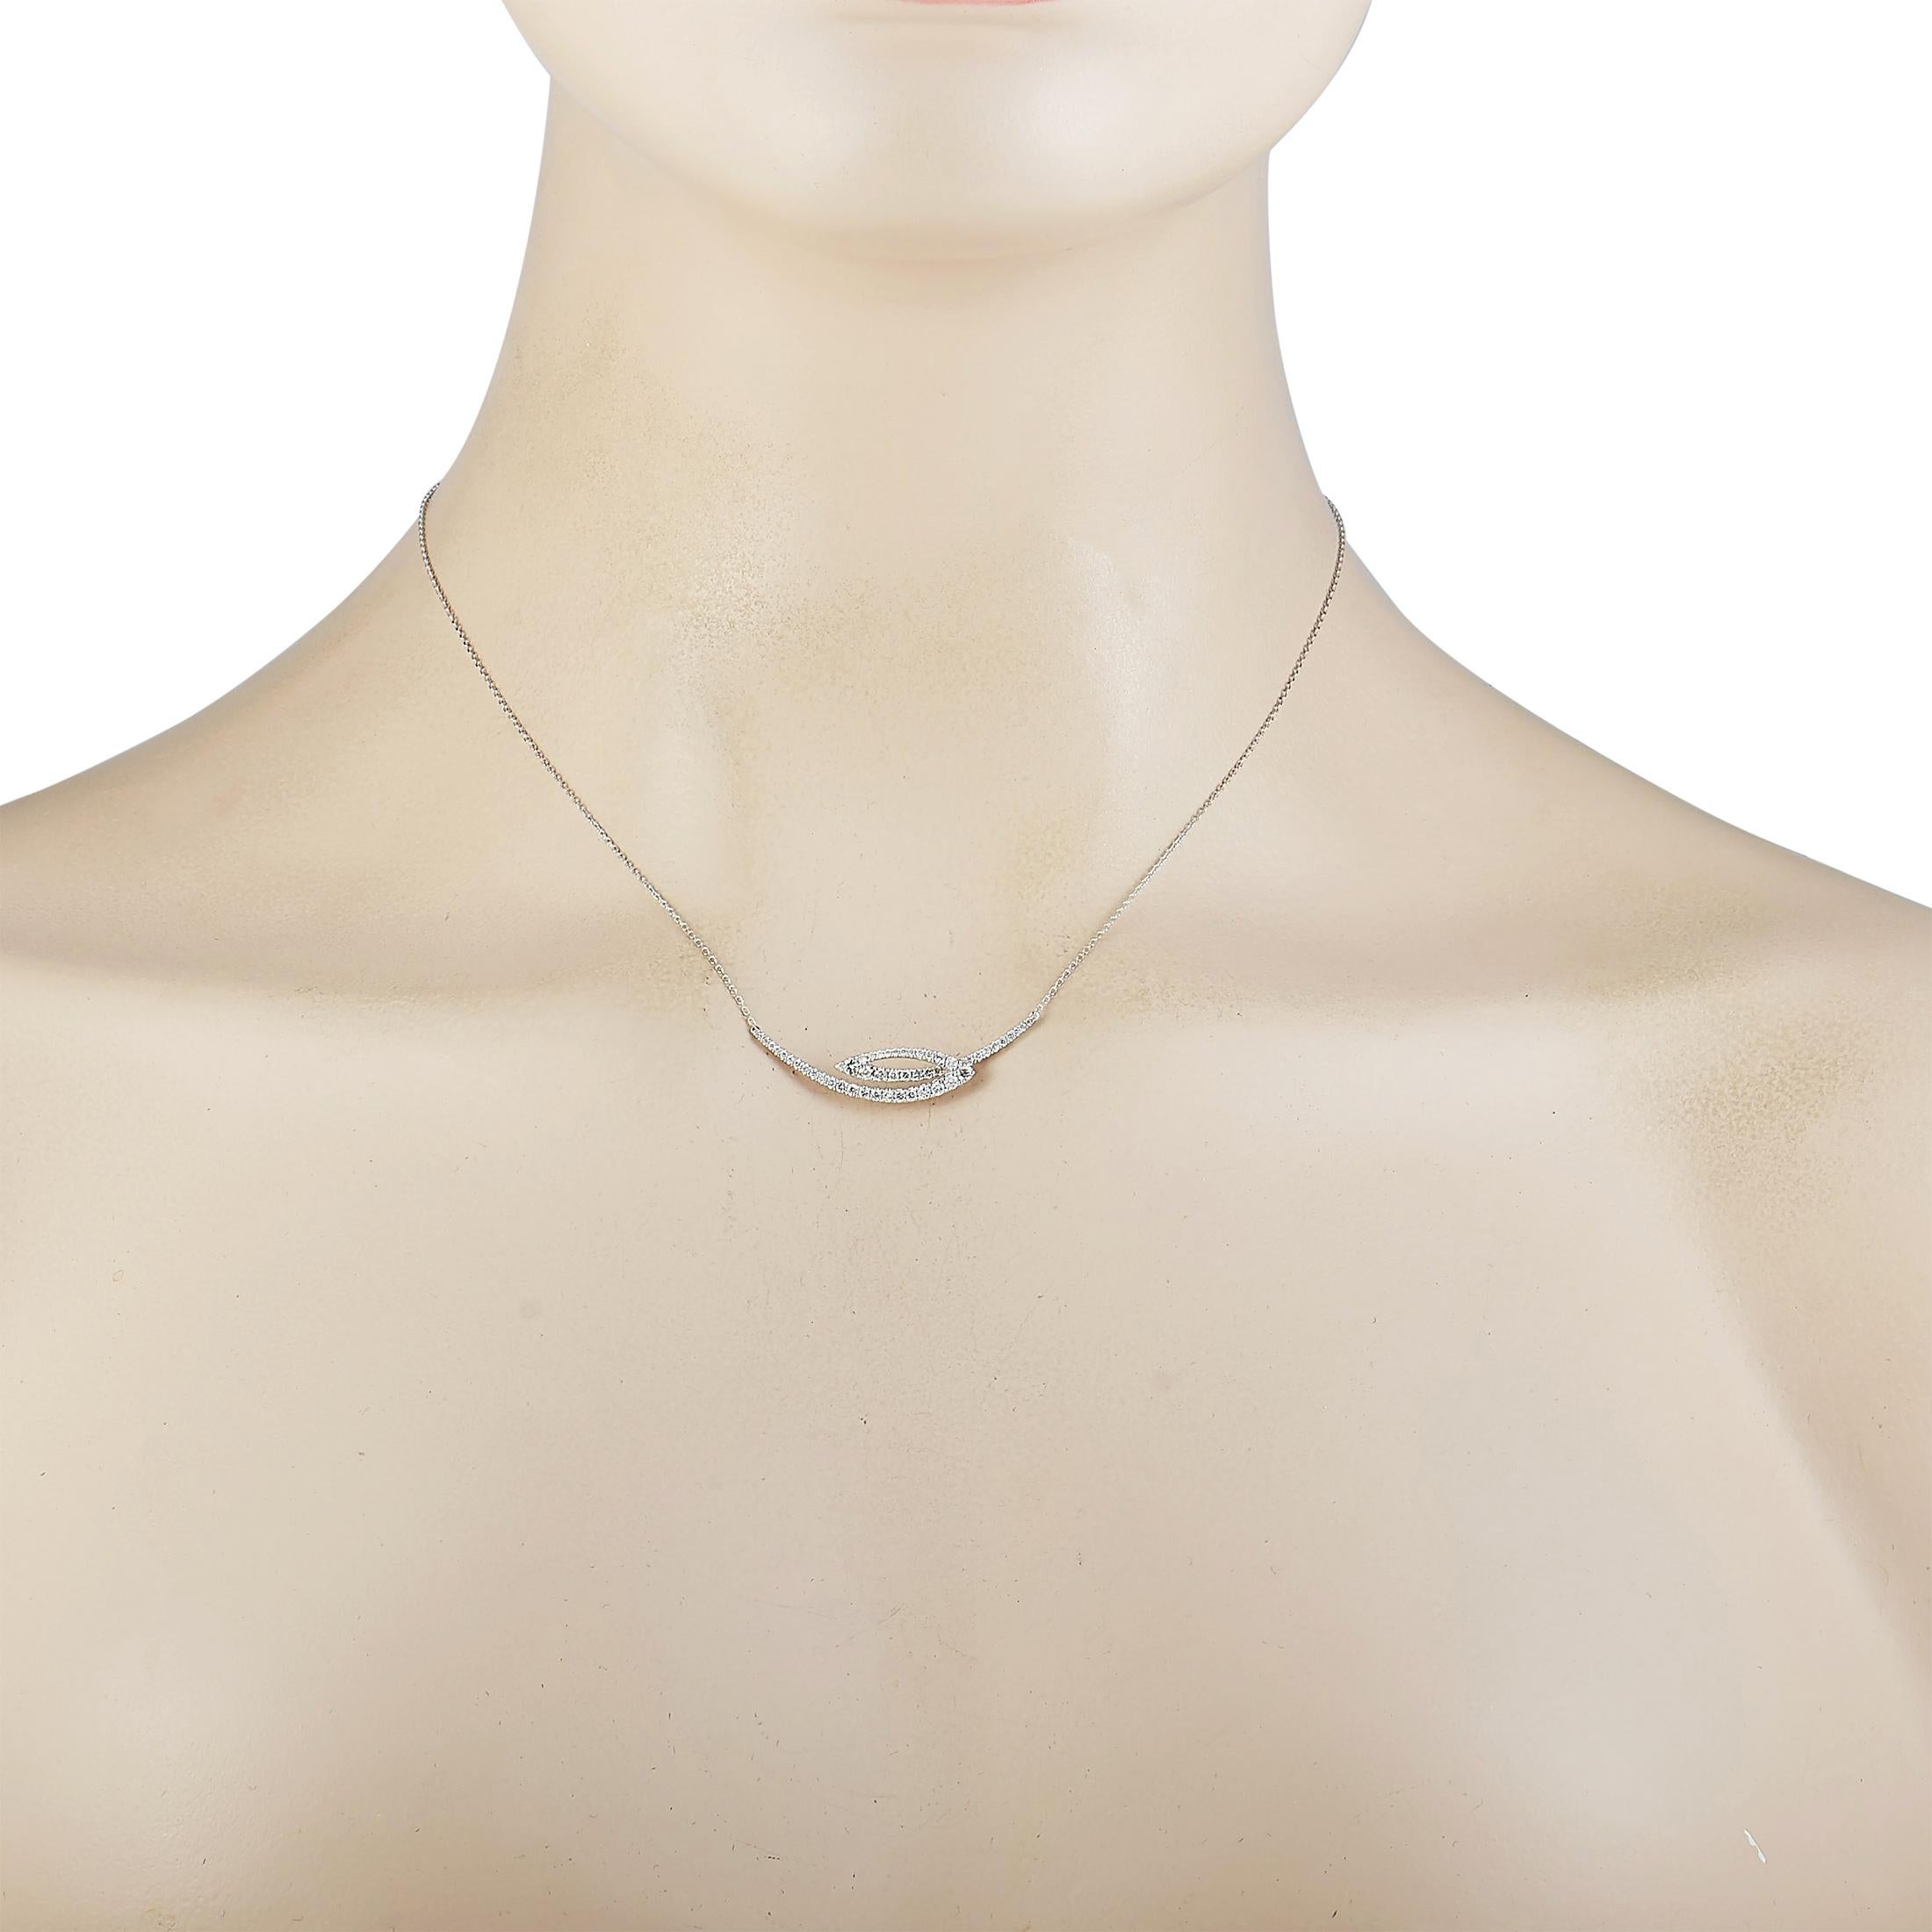 This LB Exclusive necklace is made of 18K white gold and embellished with diamonds that amount to 0.48 carats. The necklace weighs 3 grams and is presented with a 15” chain, boasting a pendant that measures 1.50” in length and 0.30” in